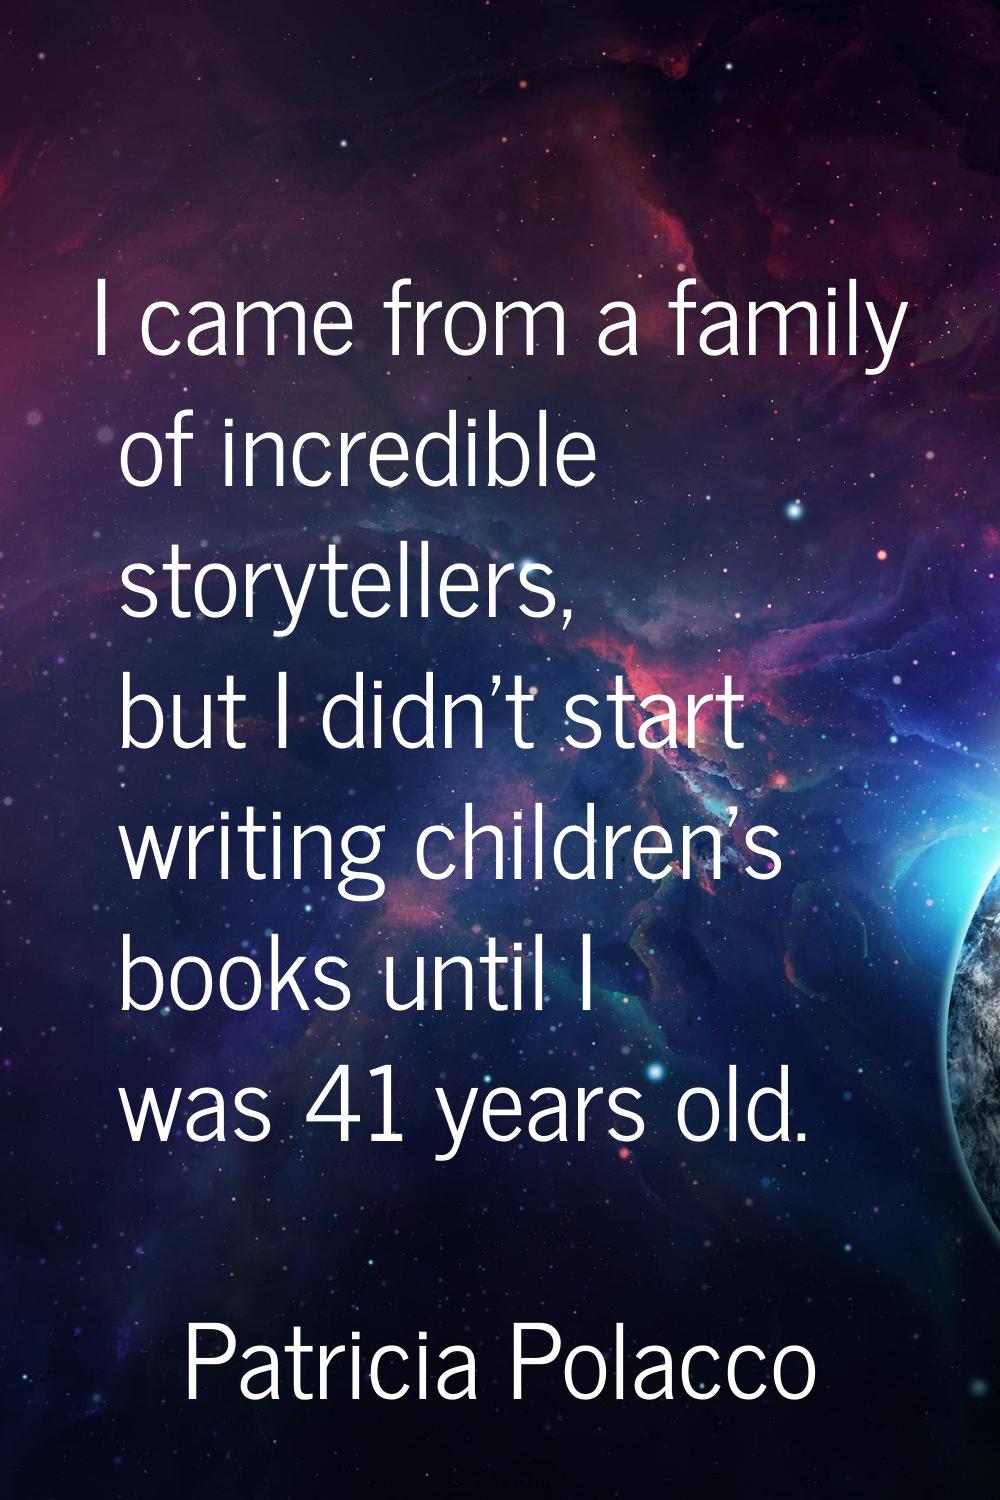 I came from a family of incredible storytellers, but I didn't start writing children's books until 